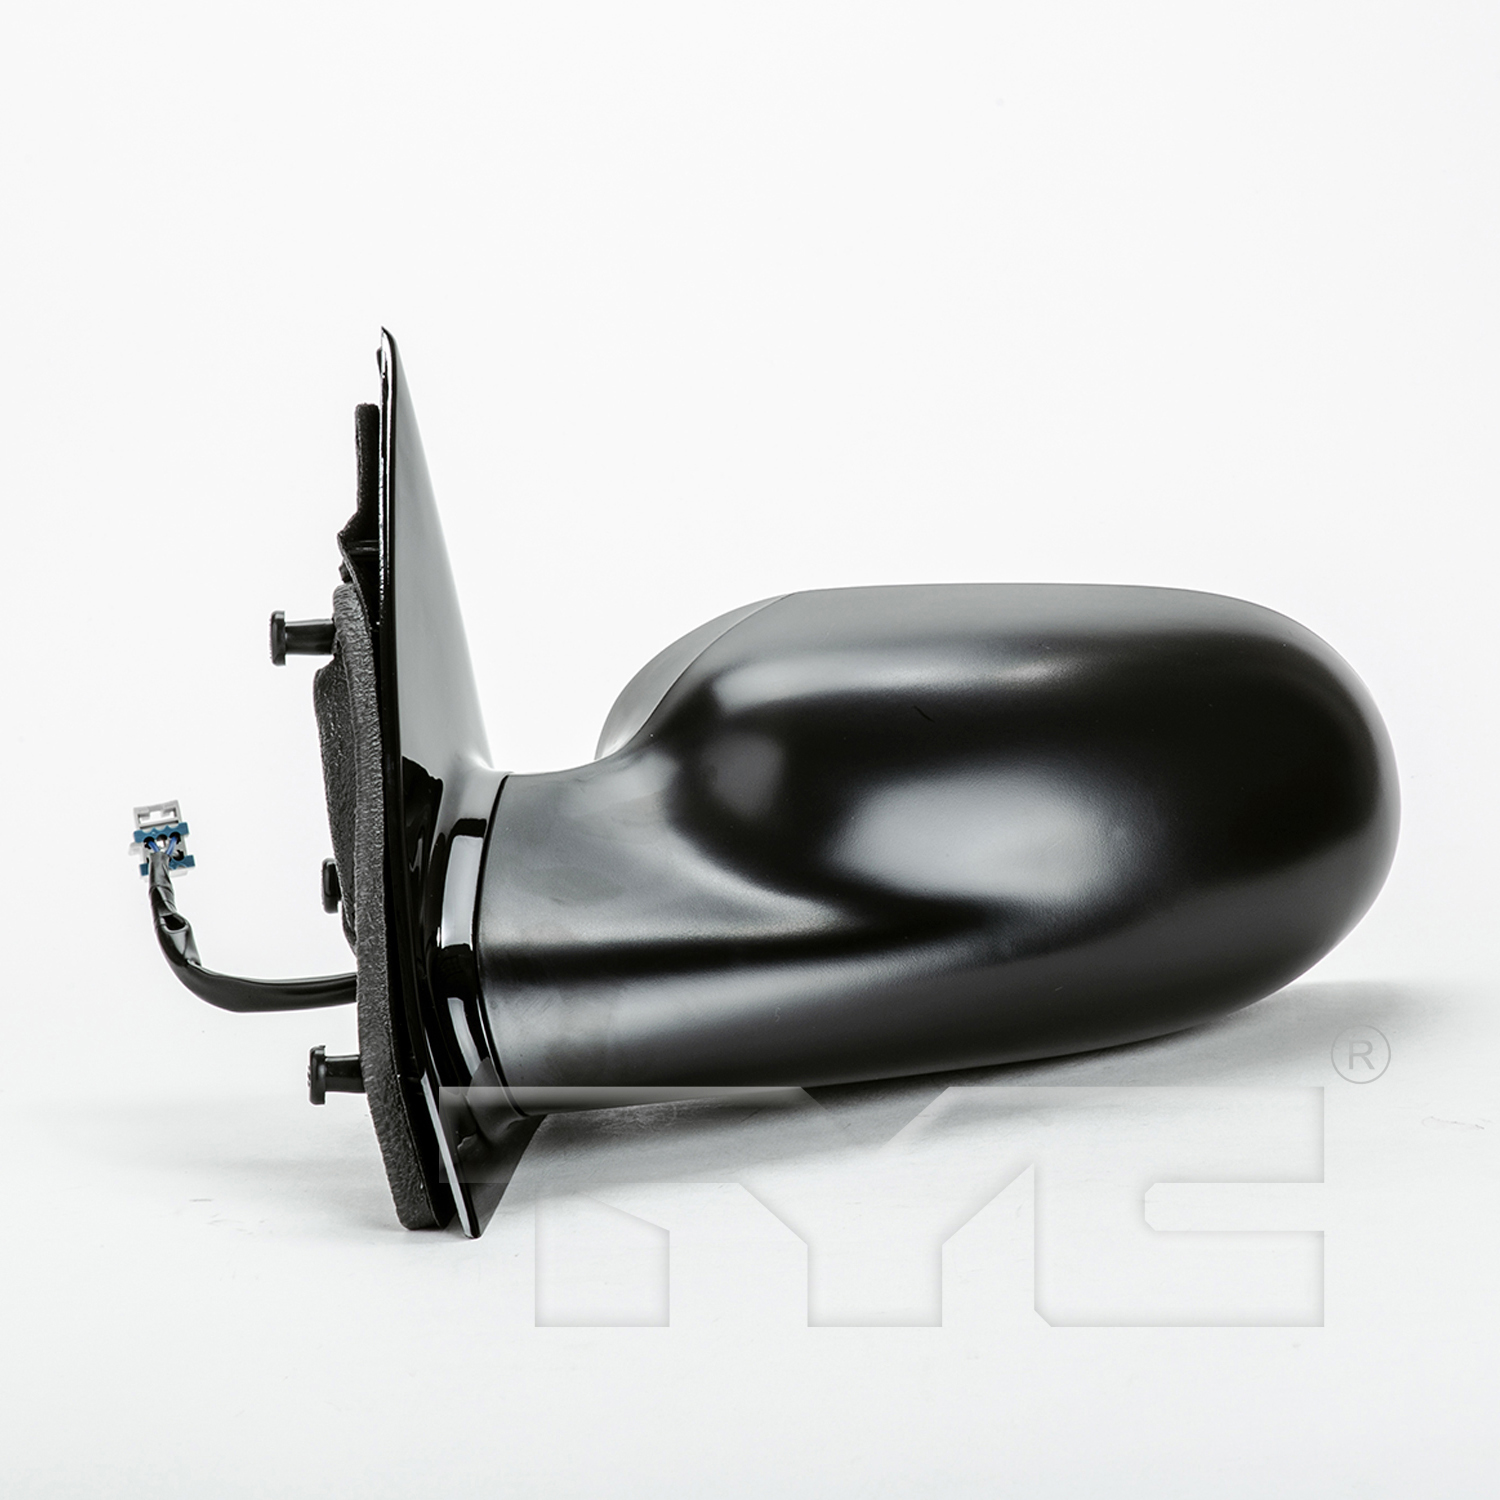 Aftermarket MIRRORS for SATURN - LW2, LW2,00-00,LT Mirror outside rear view